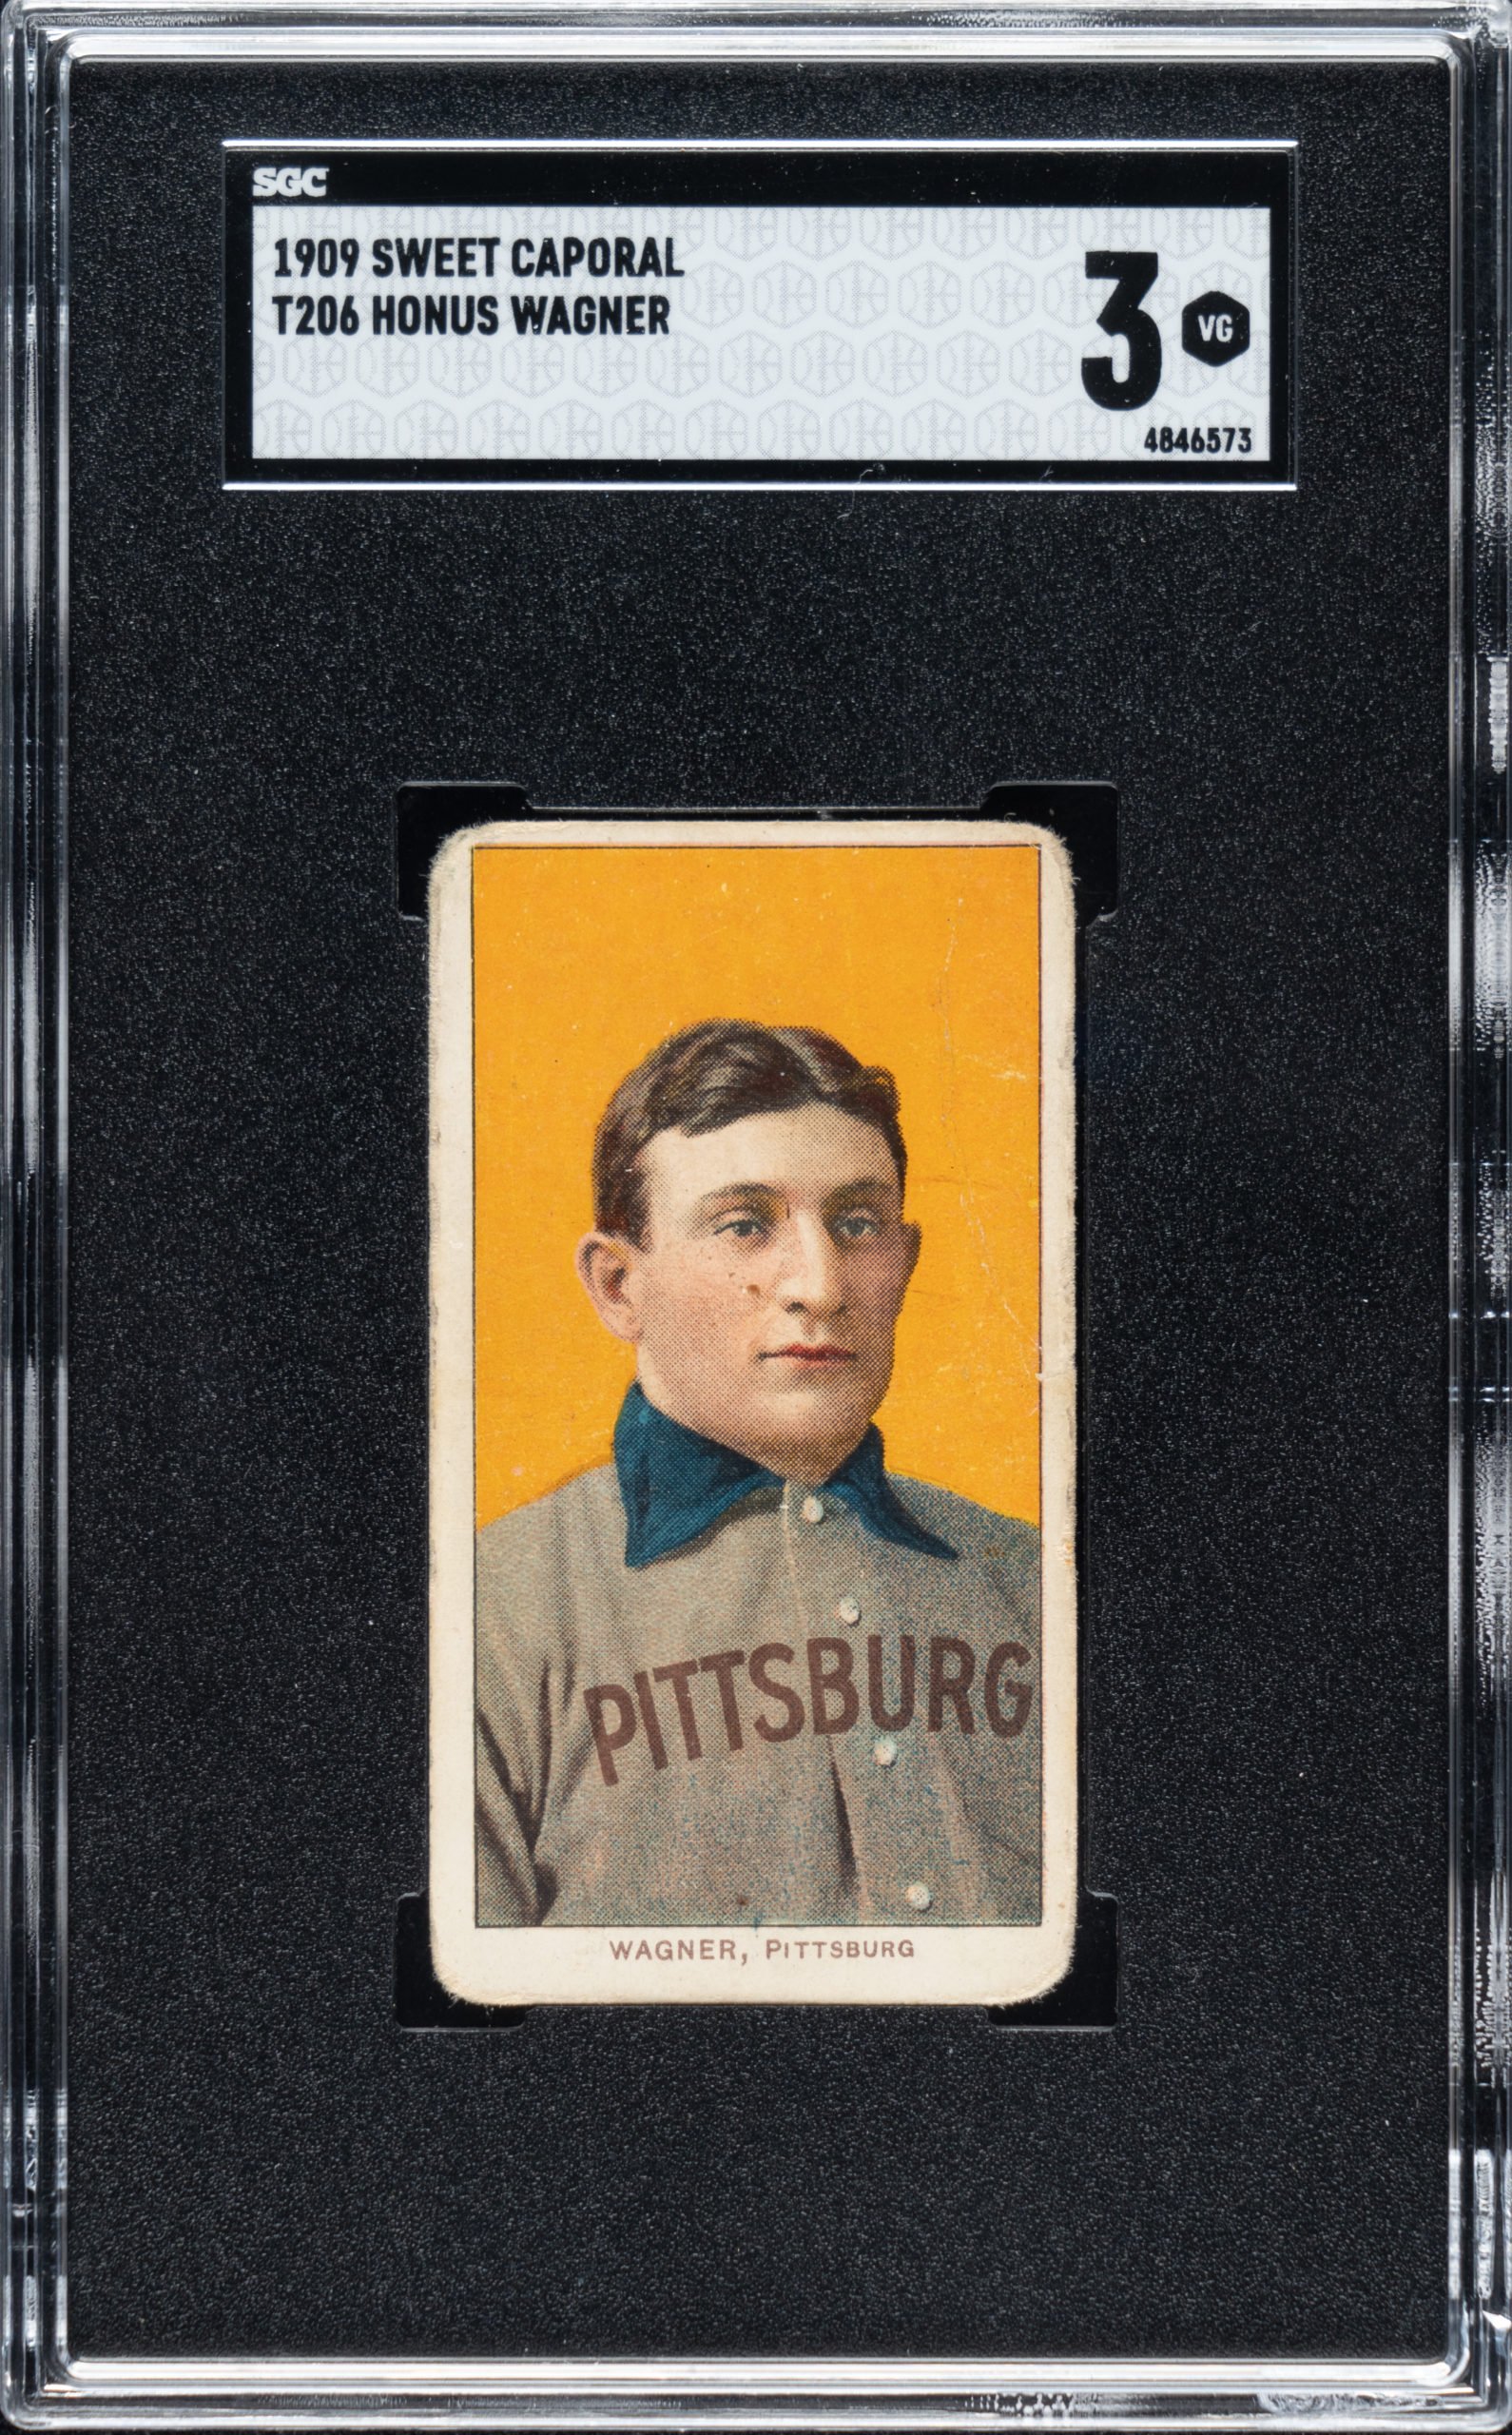 Honus Wagner card sells for record $1.4 million - Sports Collectors Digest